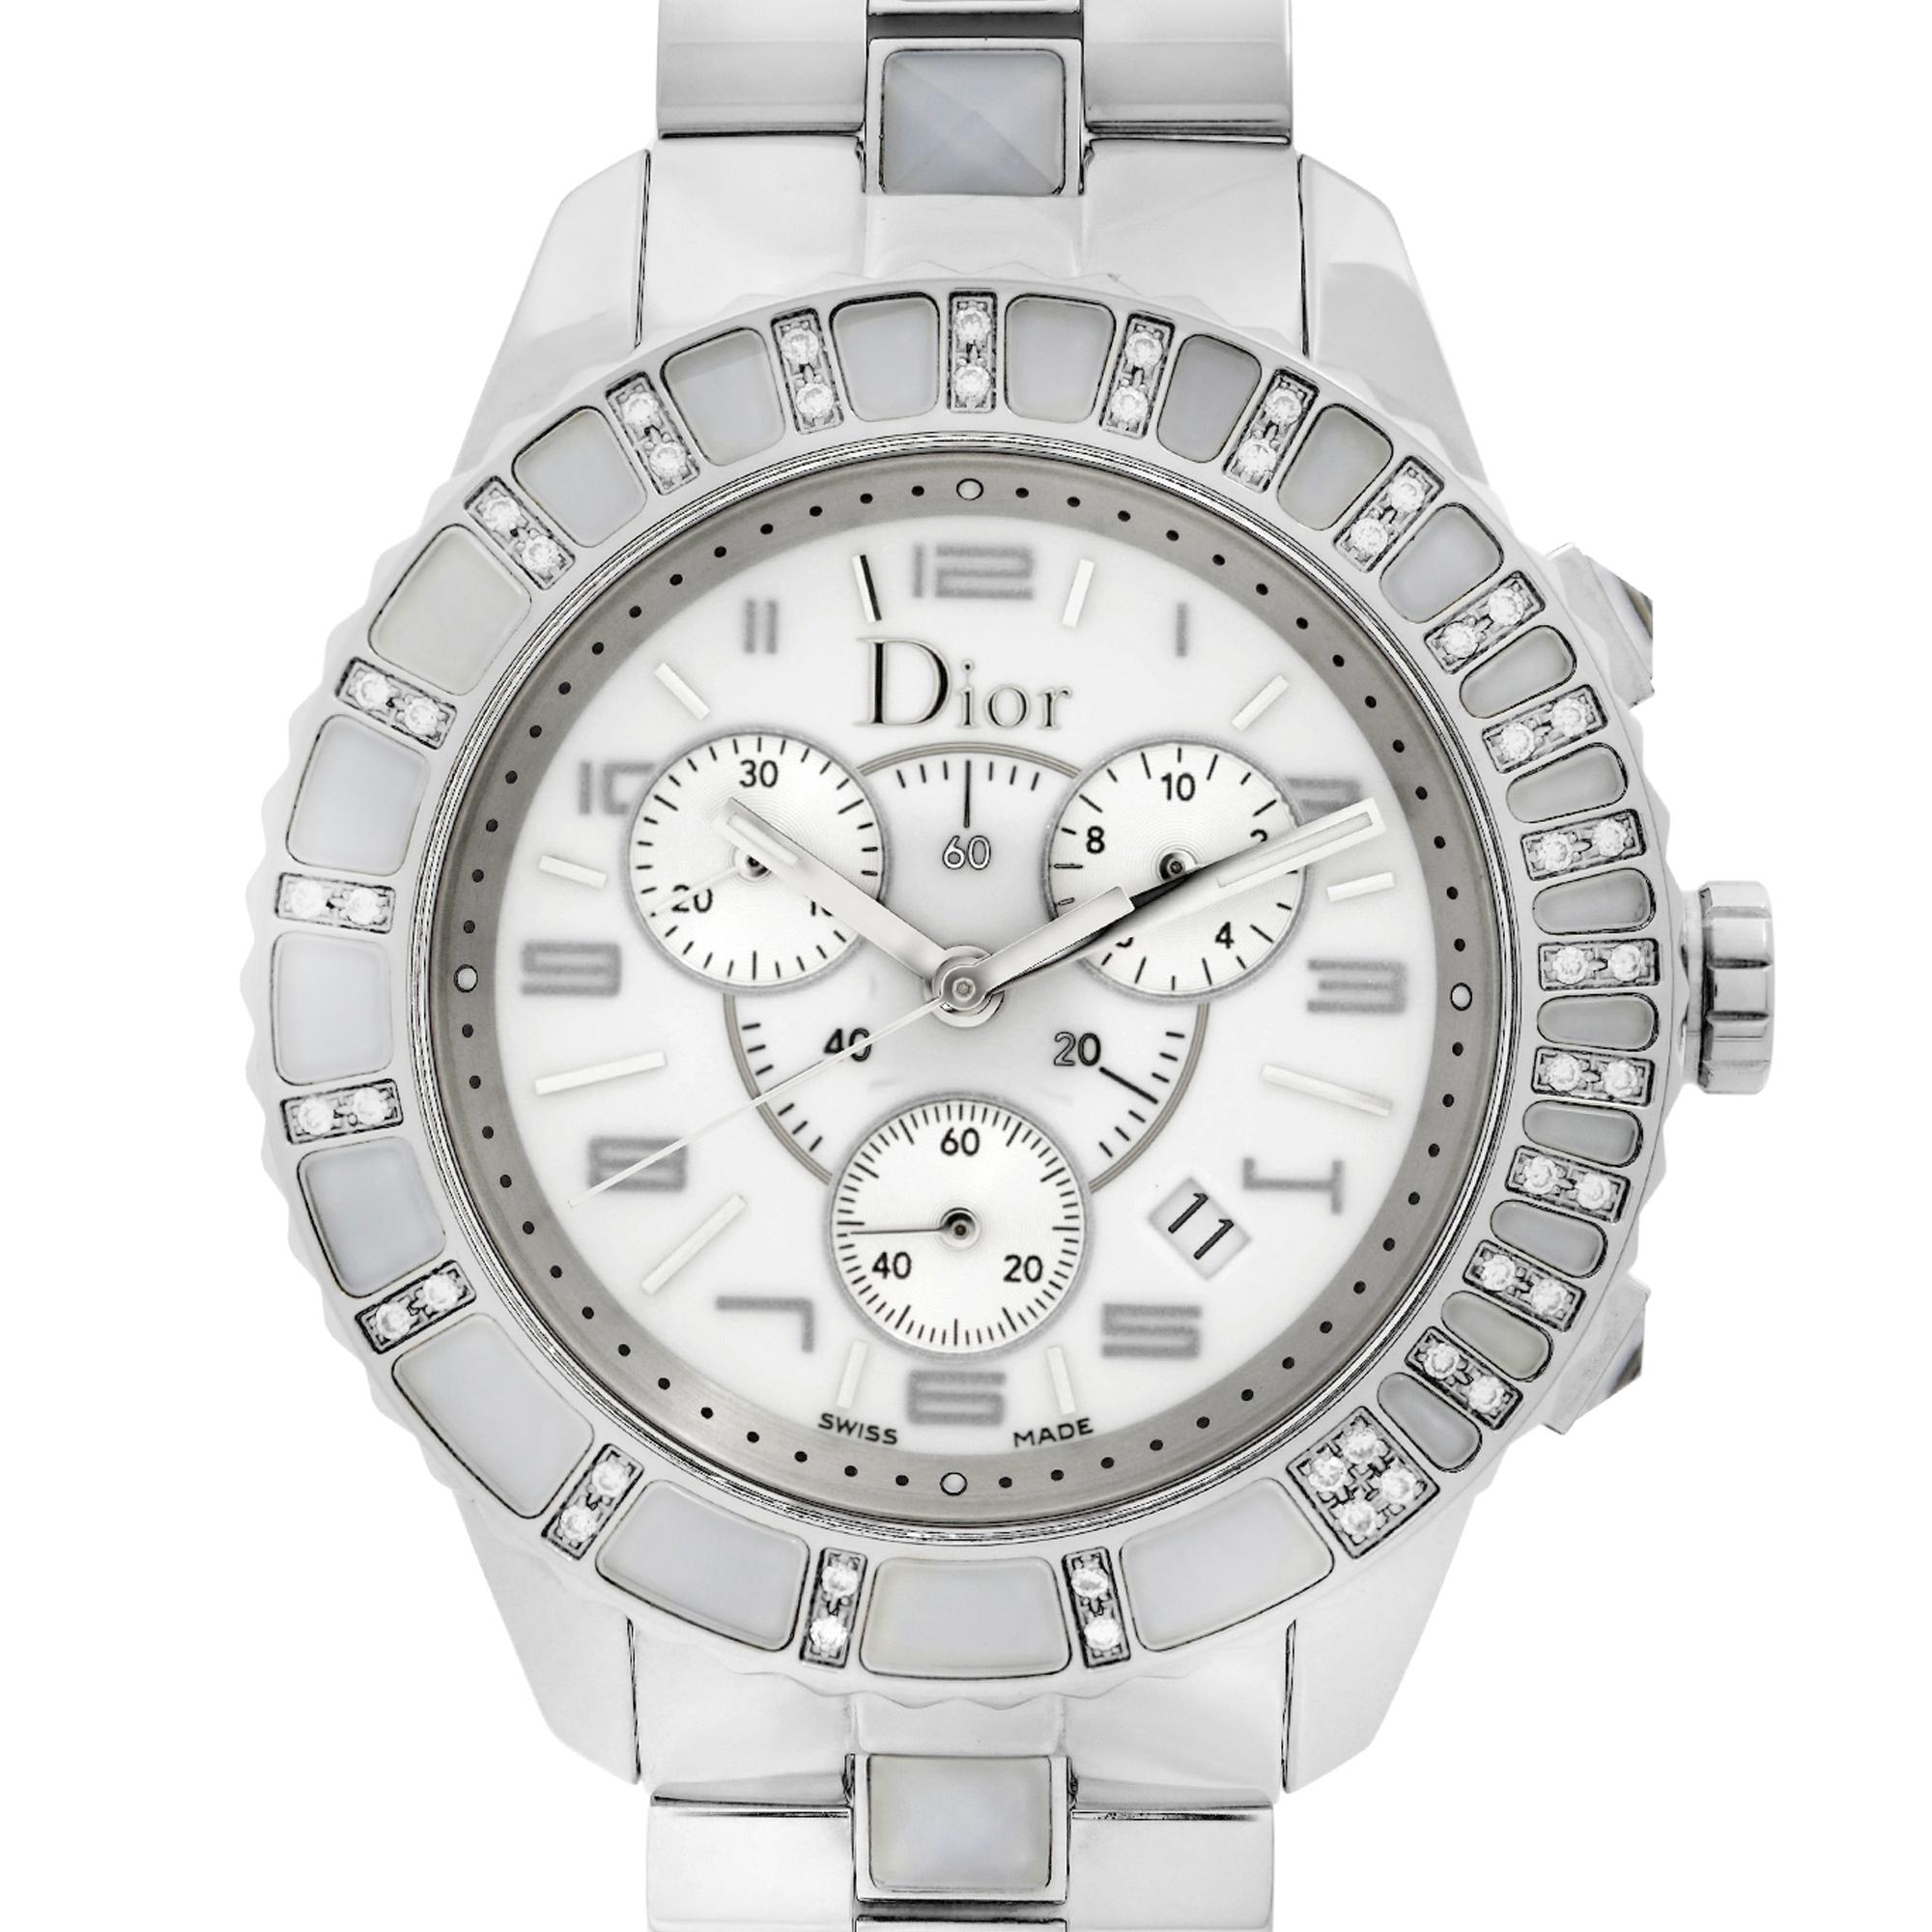 Display Model Dior Christal Chronograph 39mm Stainless Steel Diamond White Dial Quartz Watch CD114311M001. This Beautiful Timepiece Features: Stainless Steel Case and Bracelet with Ceramic Center Links Covers, Uni-Directional Rotating Bezel Set with